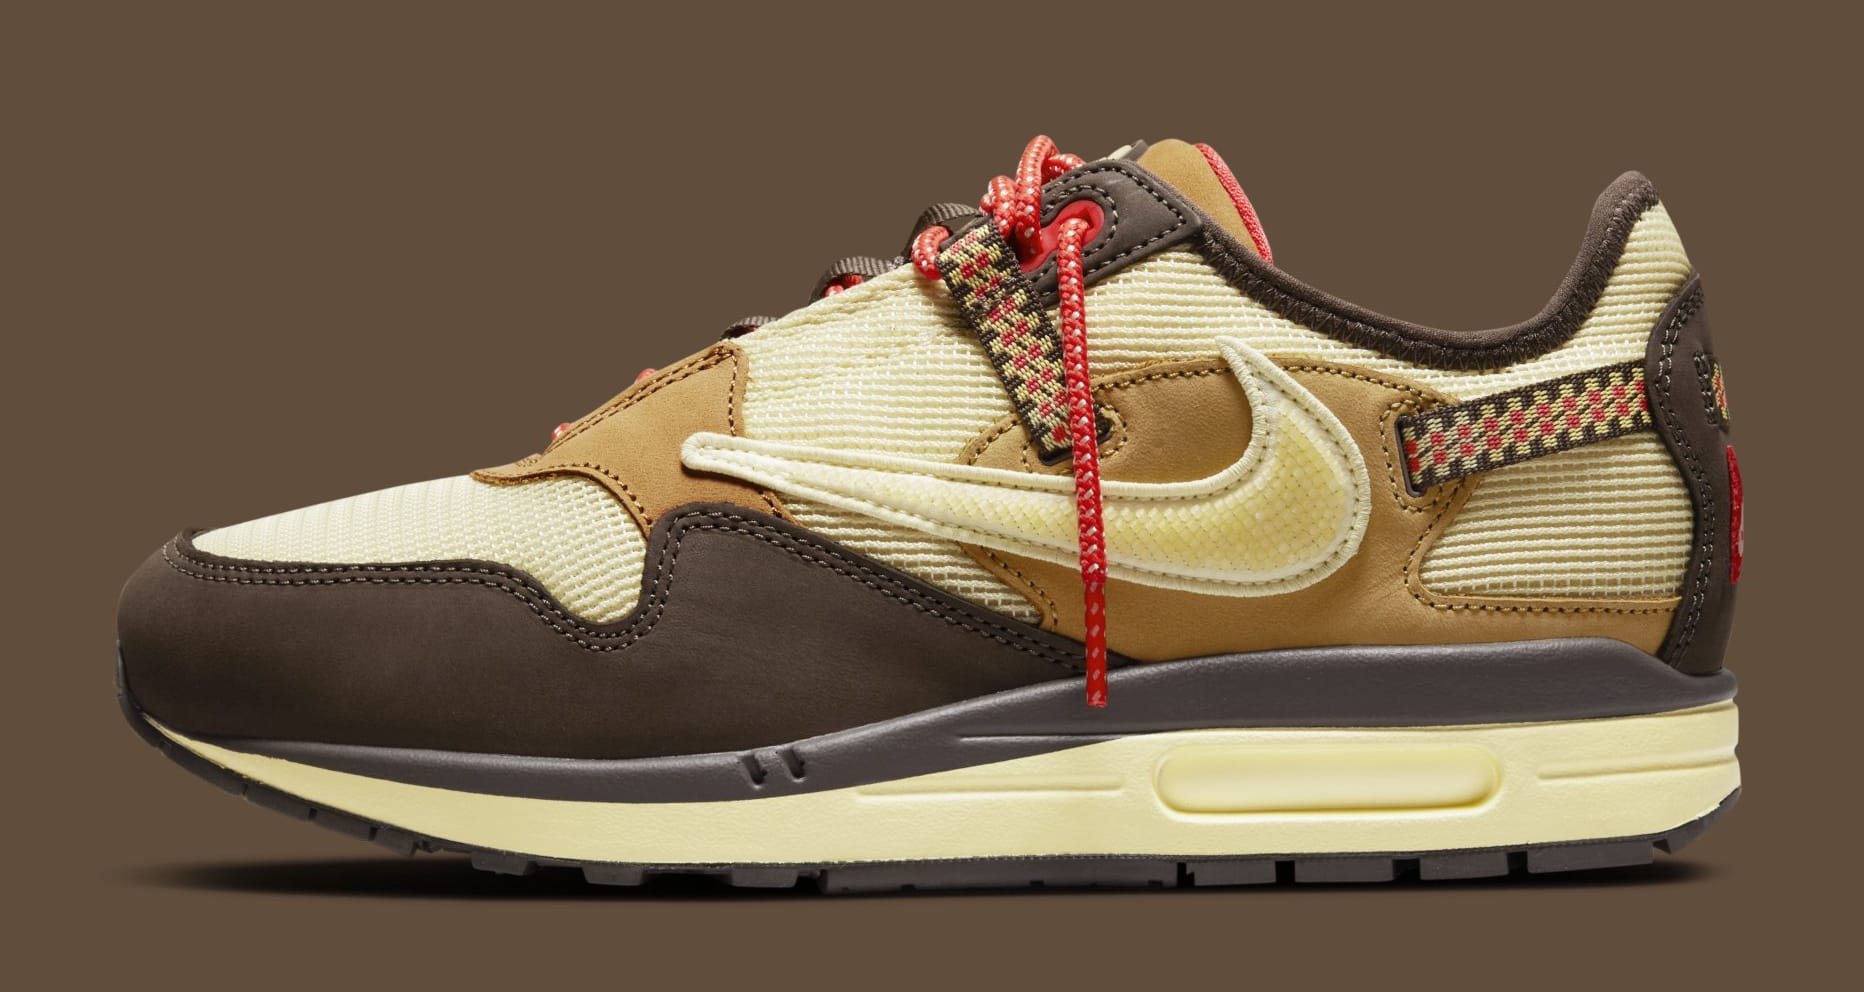 Travis Scott x Nike Air Max 1 Collaboration Release Date | Sole Collector